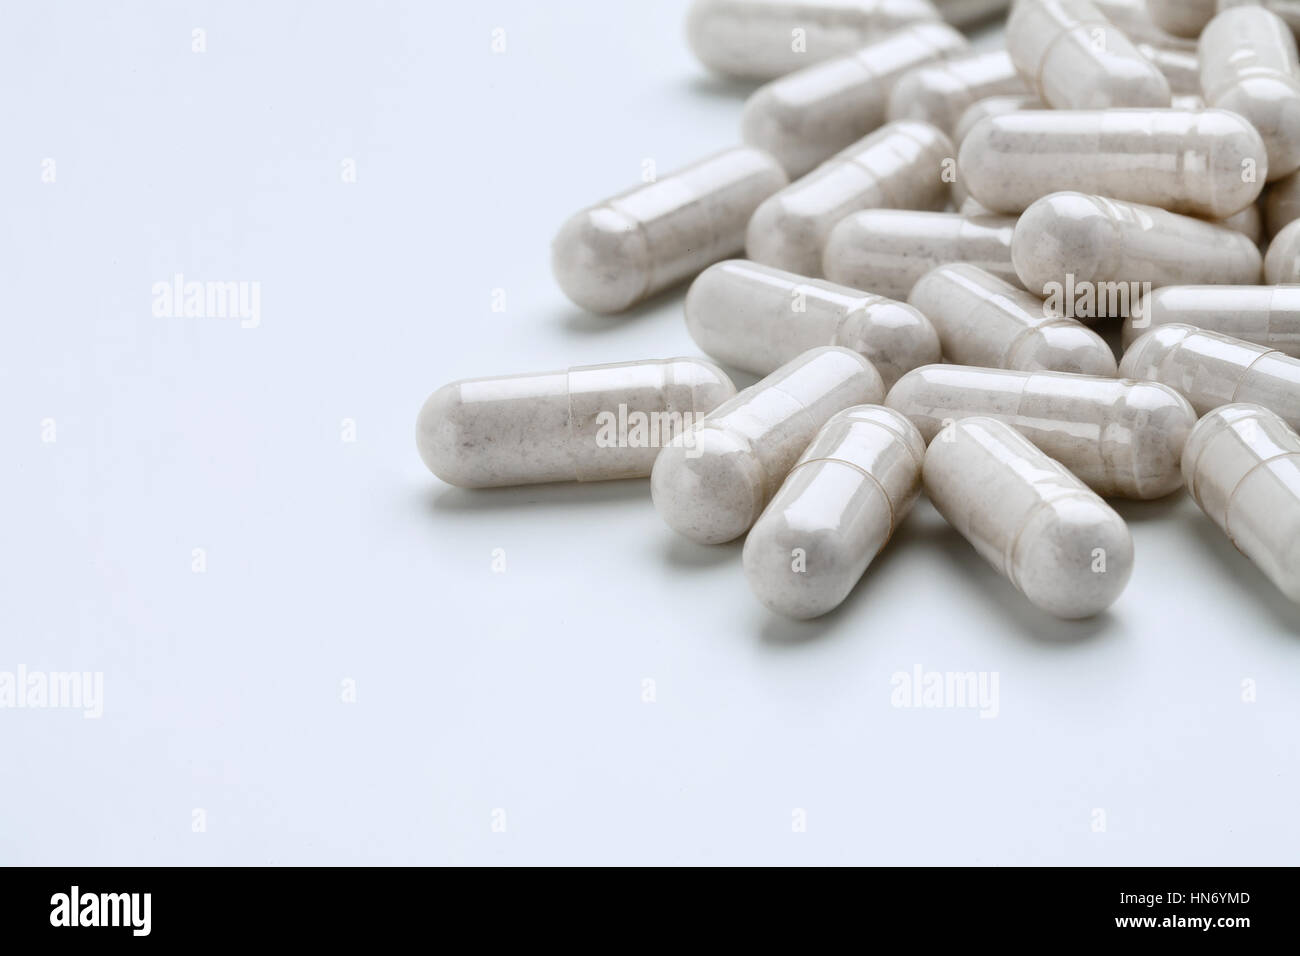 Pile of white capsules probiotic powder inside. Copy space. High resolution product. Health care concept Stock Photo